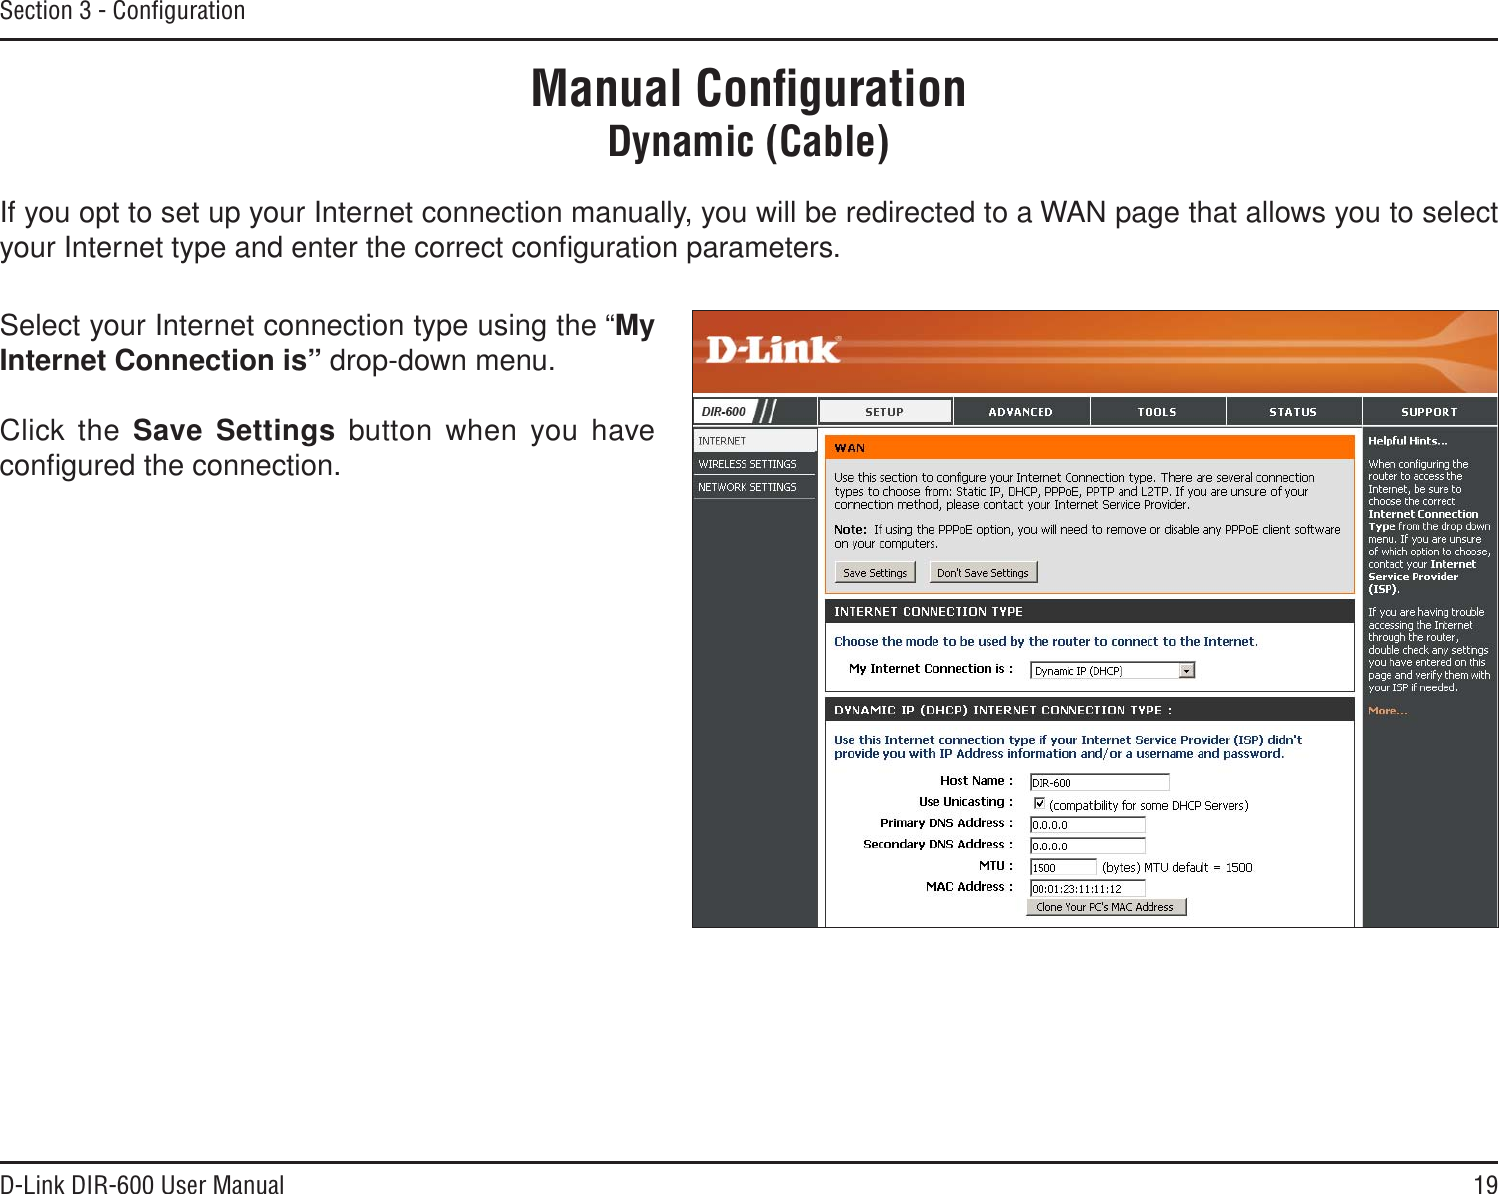 19D-Link DIR-600 User ManualSection 3 - ConﬁgurationIf you opt to set up your Internet connection manually, you will be redirected to a WAN page that allows you to select your Internet type and enter the correct conﬁguration parameters.Select your Internet connection type using the “MyInternet Connection is” drop-down menu.Click the Save Settings button when you have conﬁgured the connection.Manual ConﬁgurationDynamic (Cable)